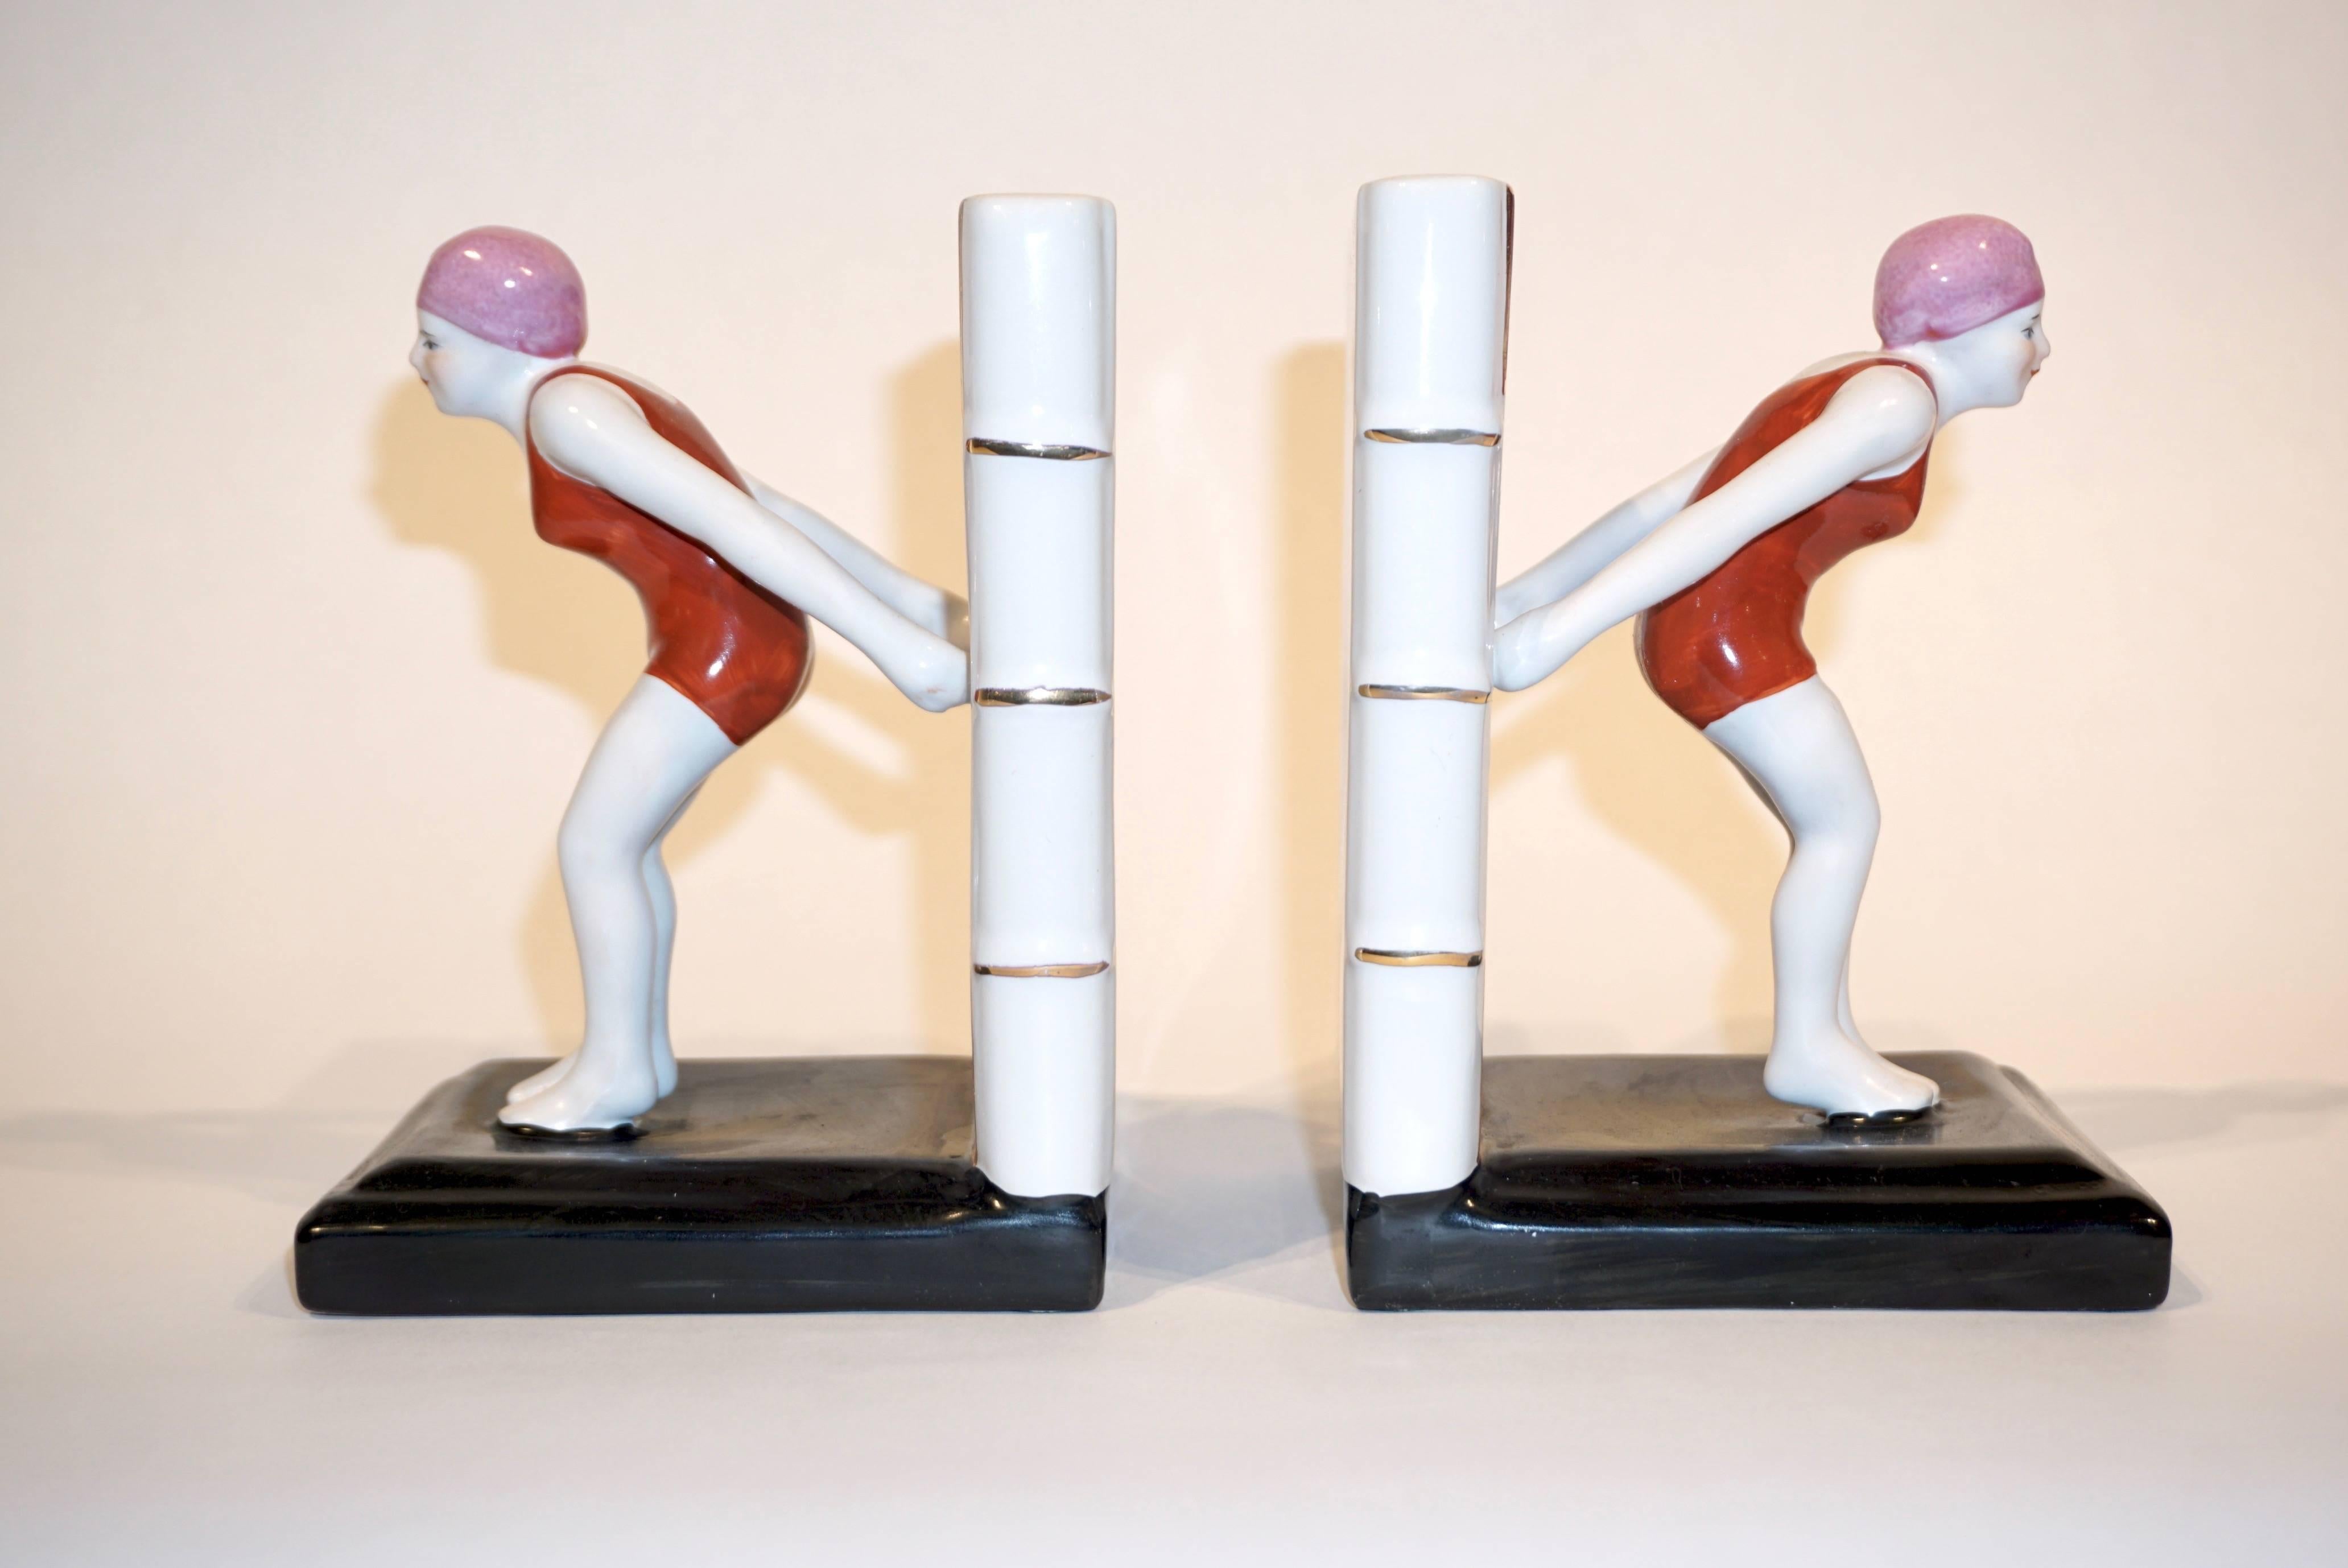 A delightful pair of ceramic Art Deco bookends representing each a diving female sculpture in red bathing suit and pink swimming cap raised on a black plinth, supported by a white back representing a book with yellow edges.